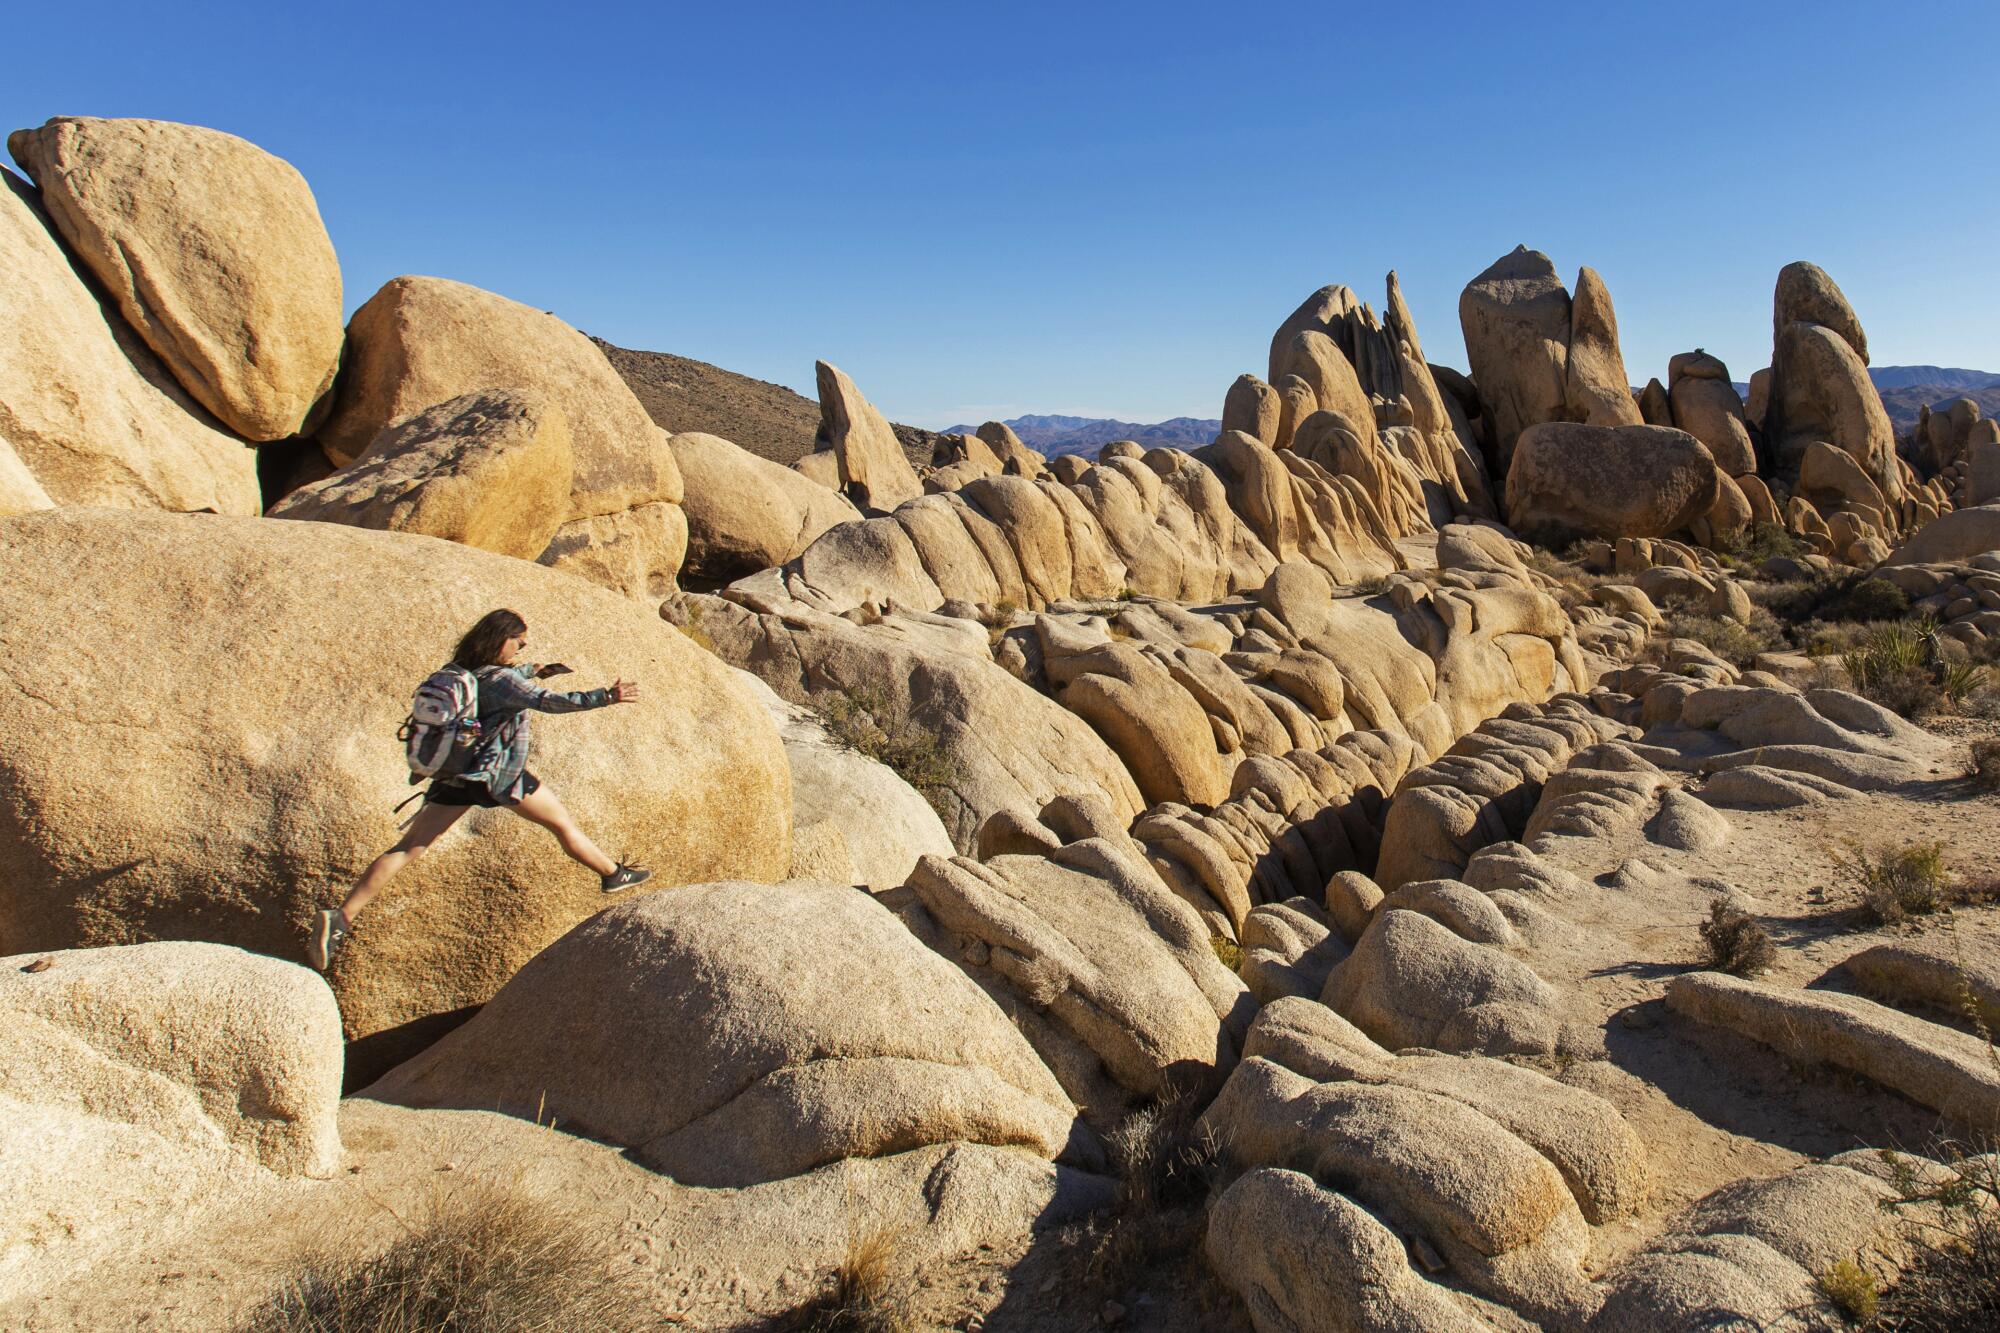 A person leaps forward on a giant rock formation.